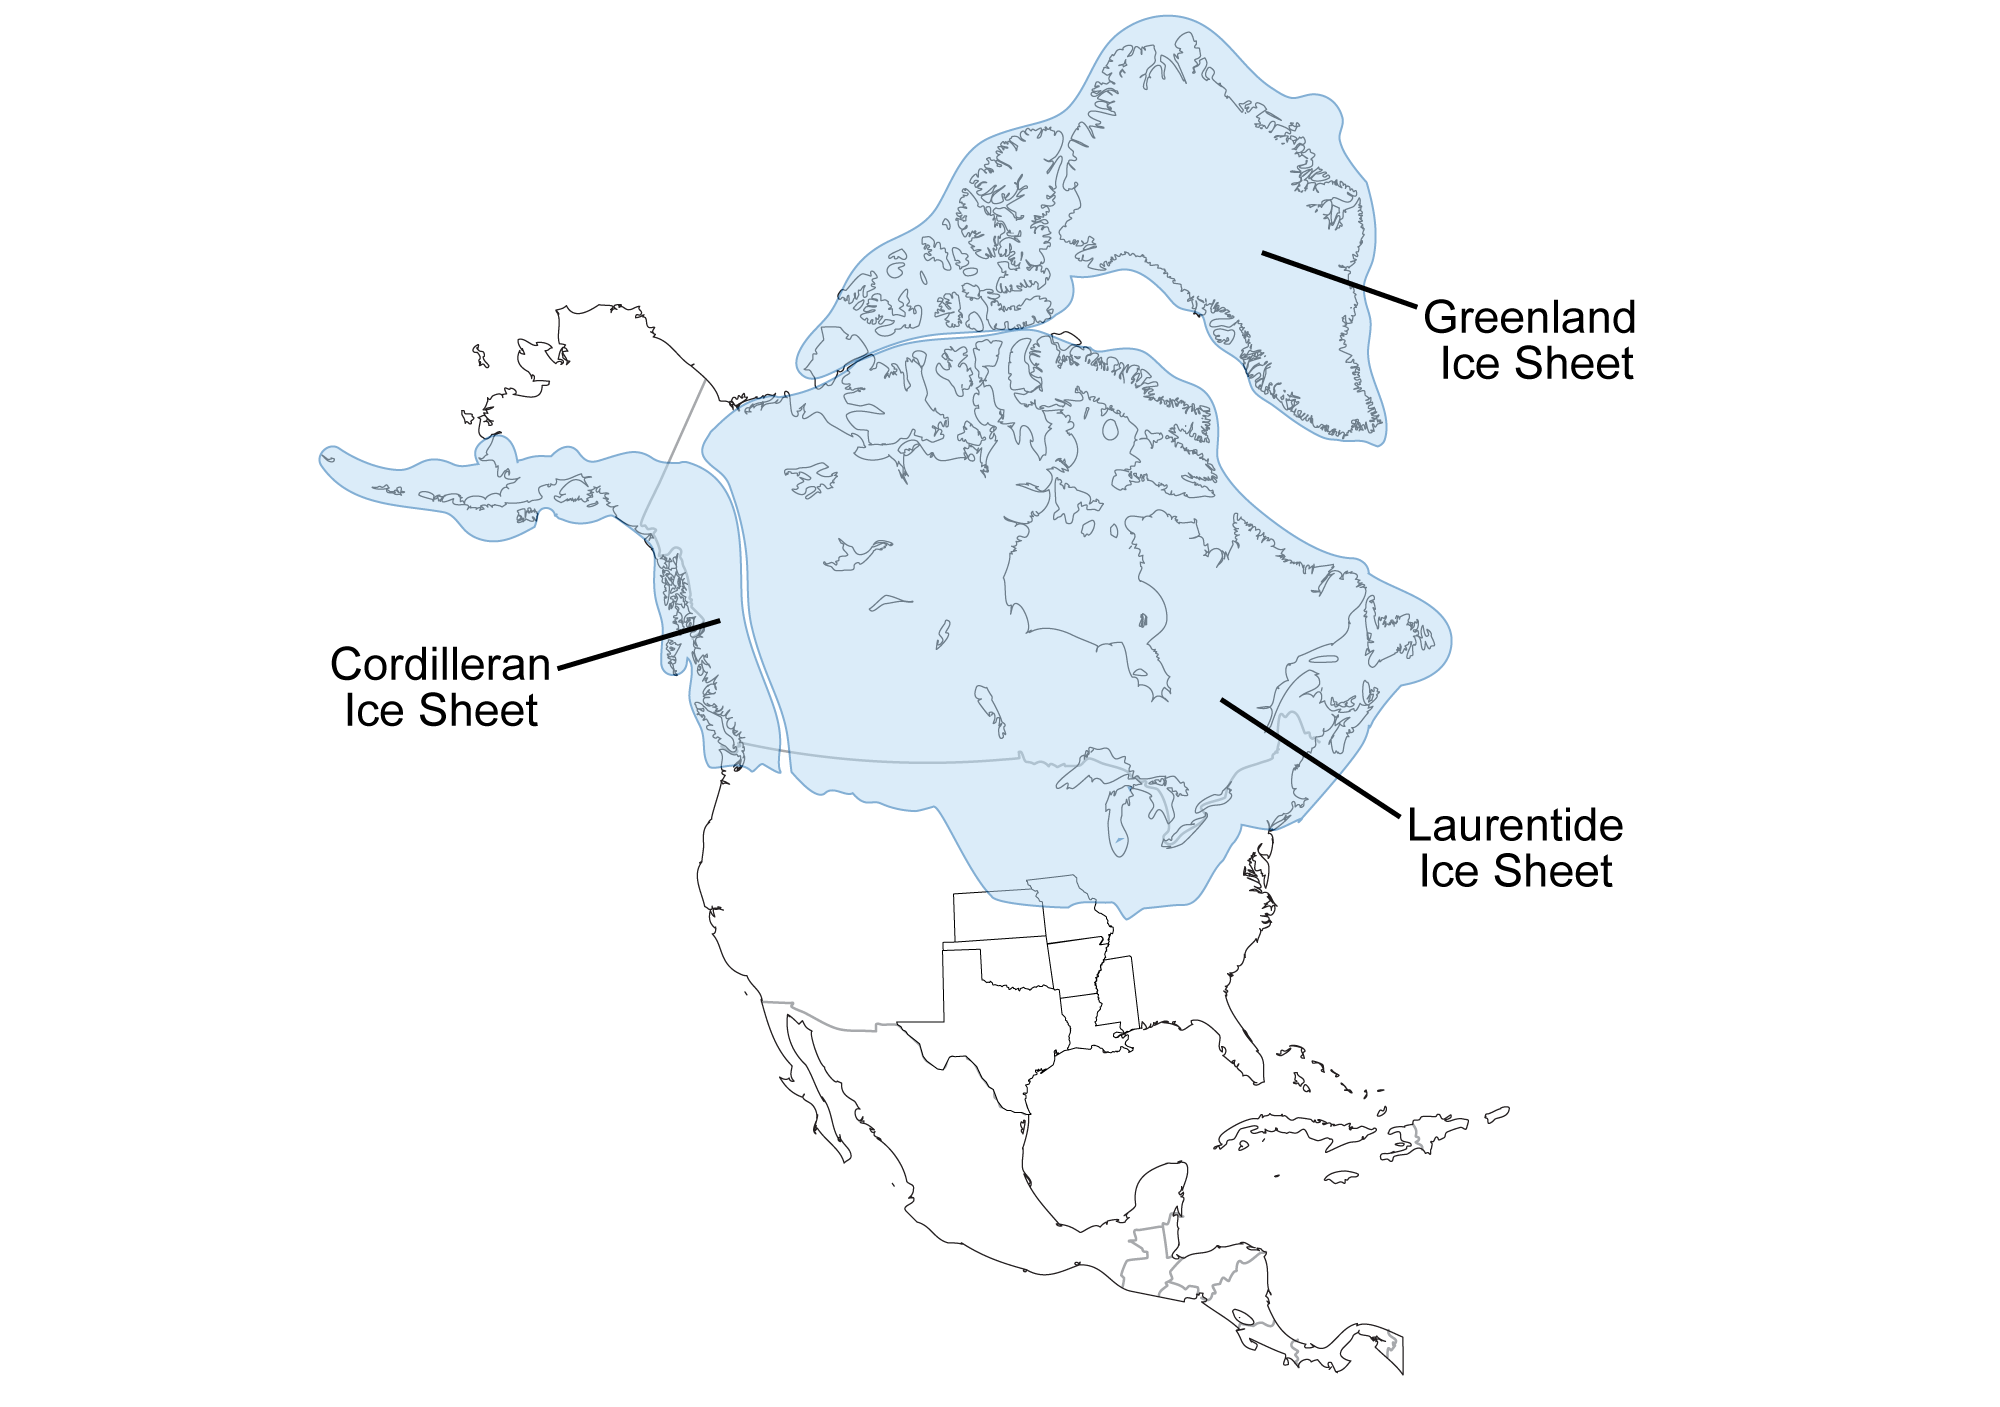 Map of North America from Greenland to Panama with country borders shown and borders of south-central states plus Mississippi shown. The Cordilleran, Greenland, and Laurentide ice sheets are labeled. The Laurentide reaches northeastern Kansas and northern Missouri.